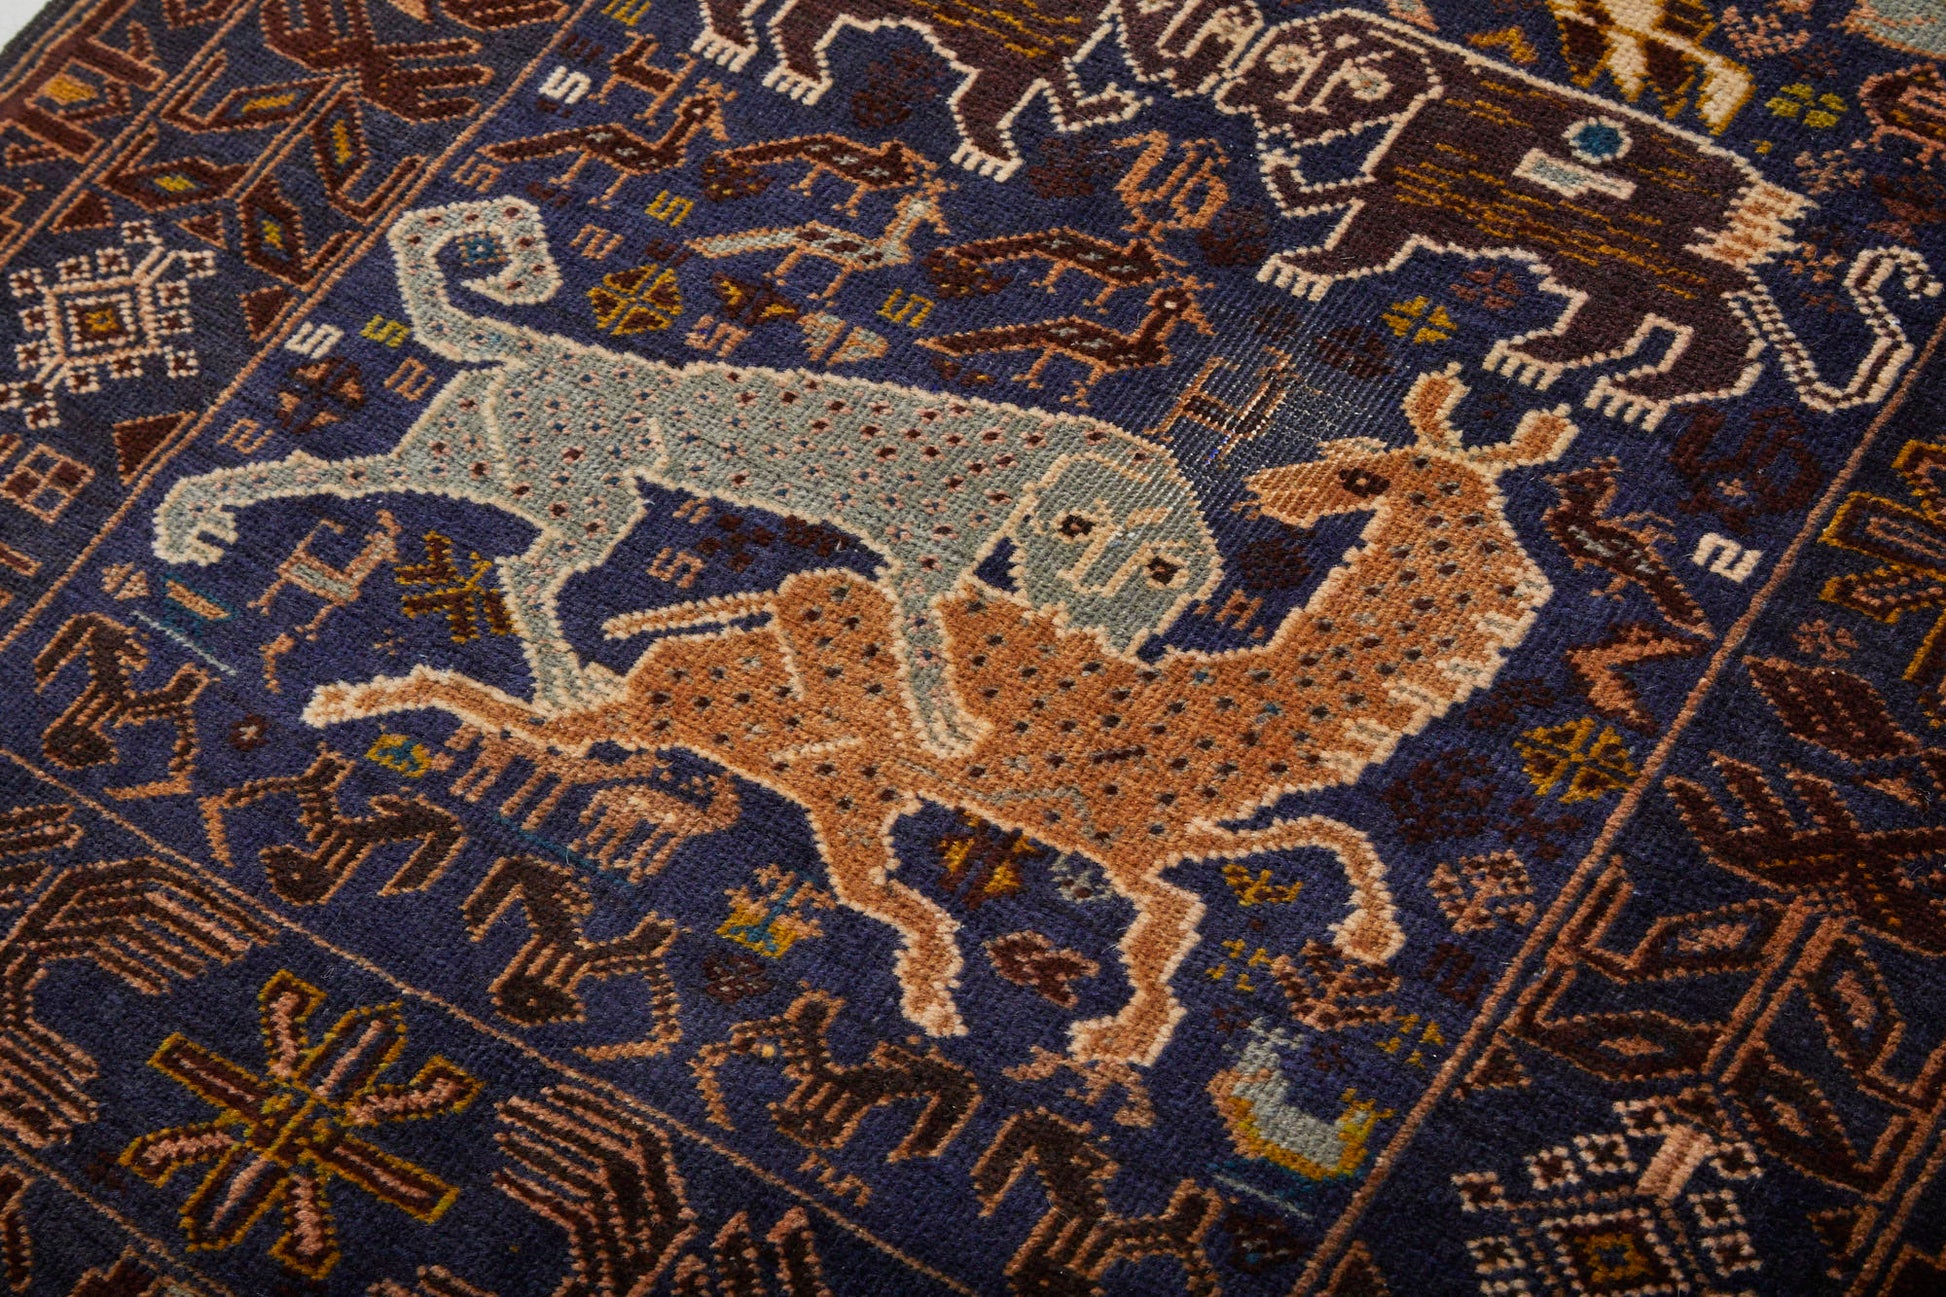 Detail of handwoven Afghan Shikargah pictorial rug depicting leopard or tiger attacking a deer on dark blue background, surrounded by symbols -  Available from King Kennedy Rugs Los Angeles